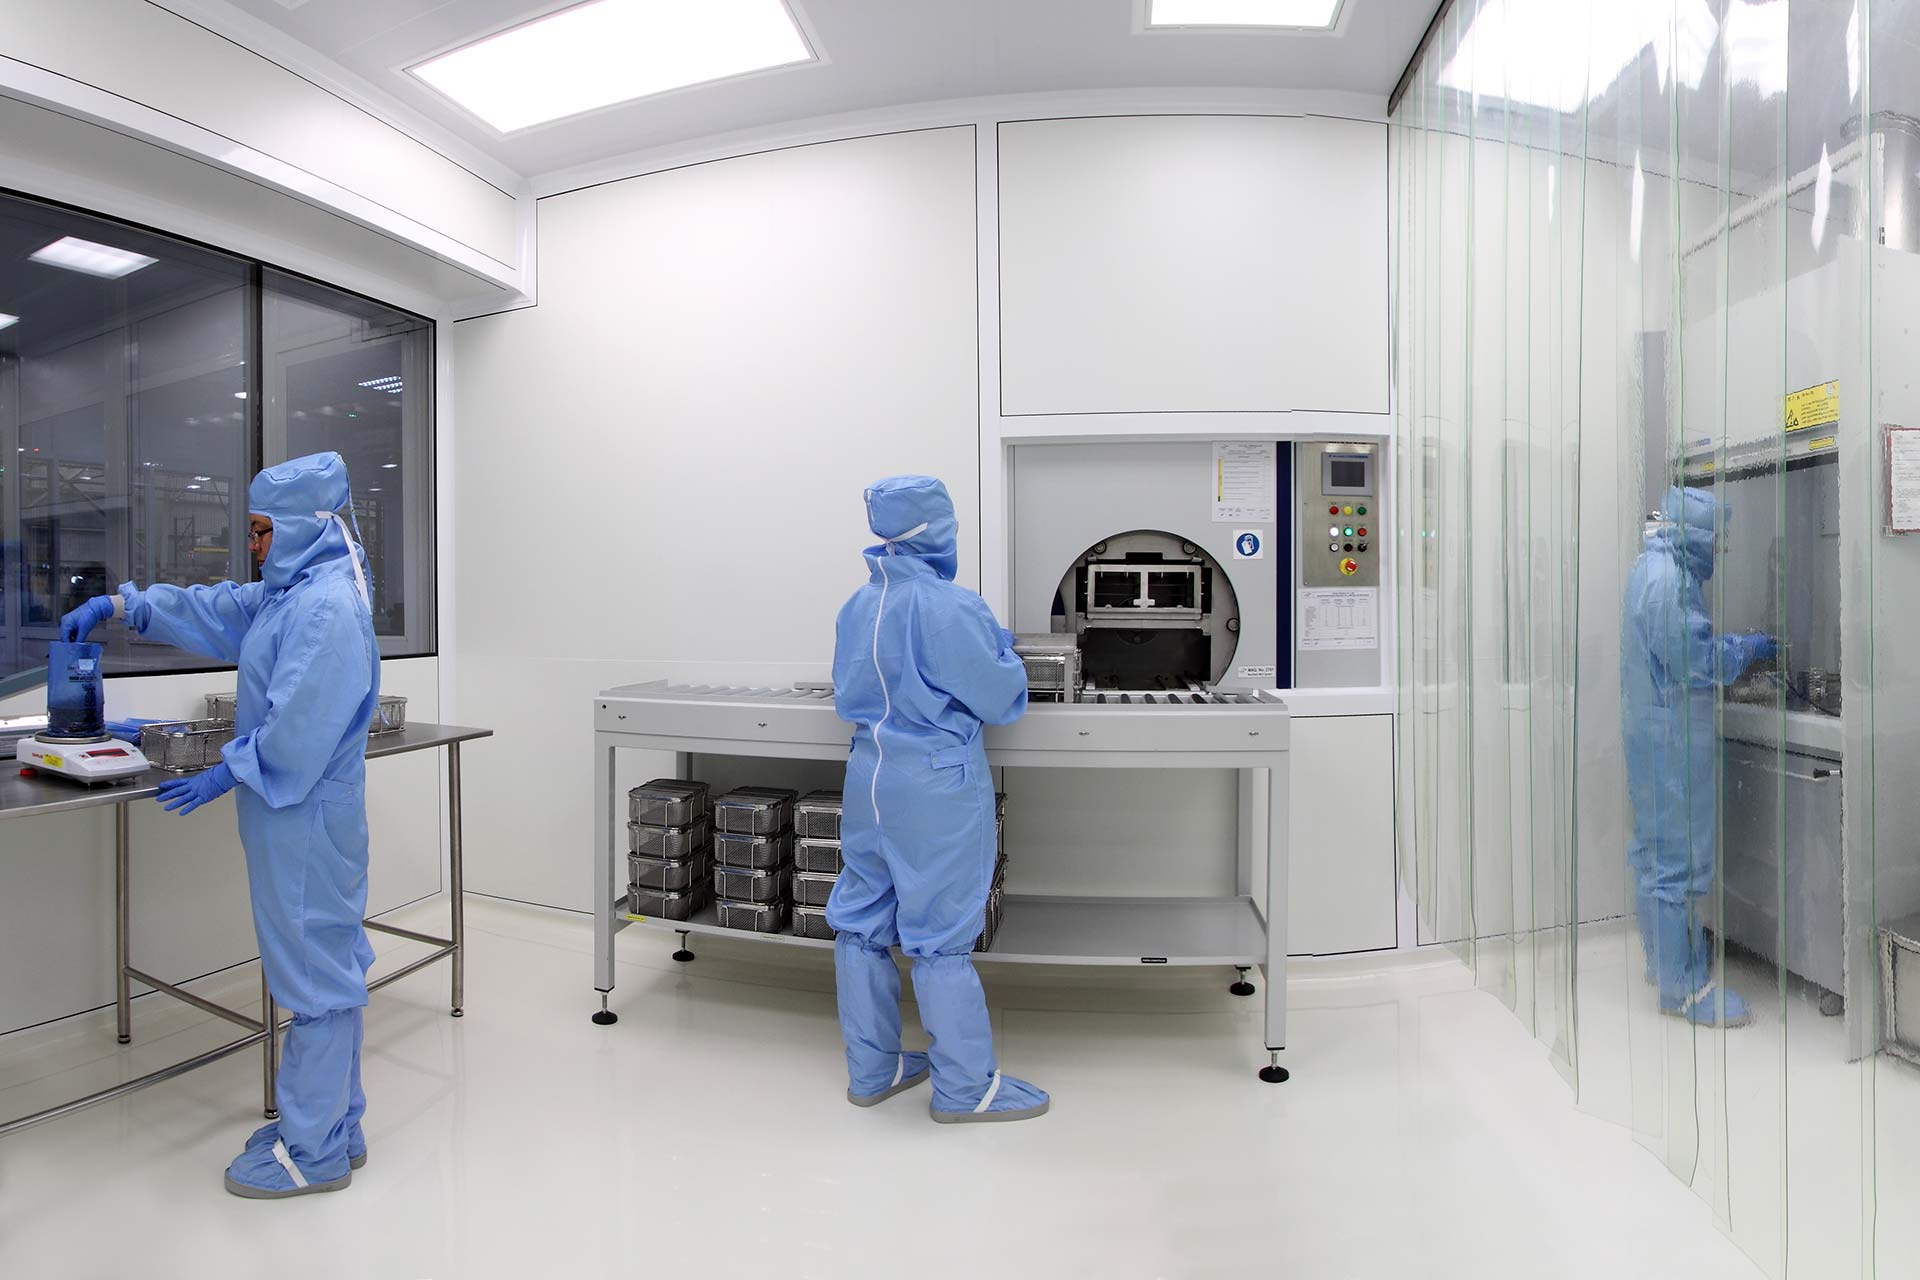 Operations in clean room